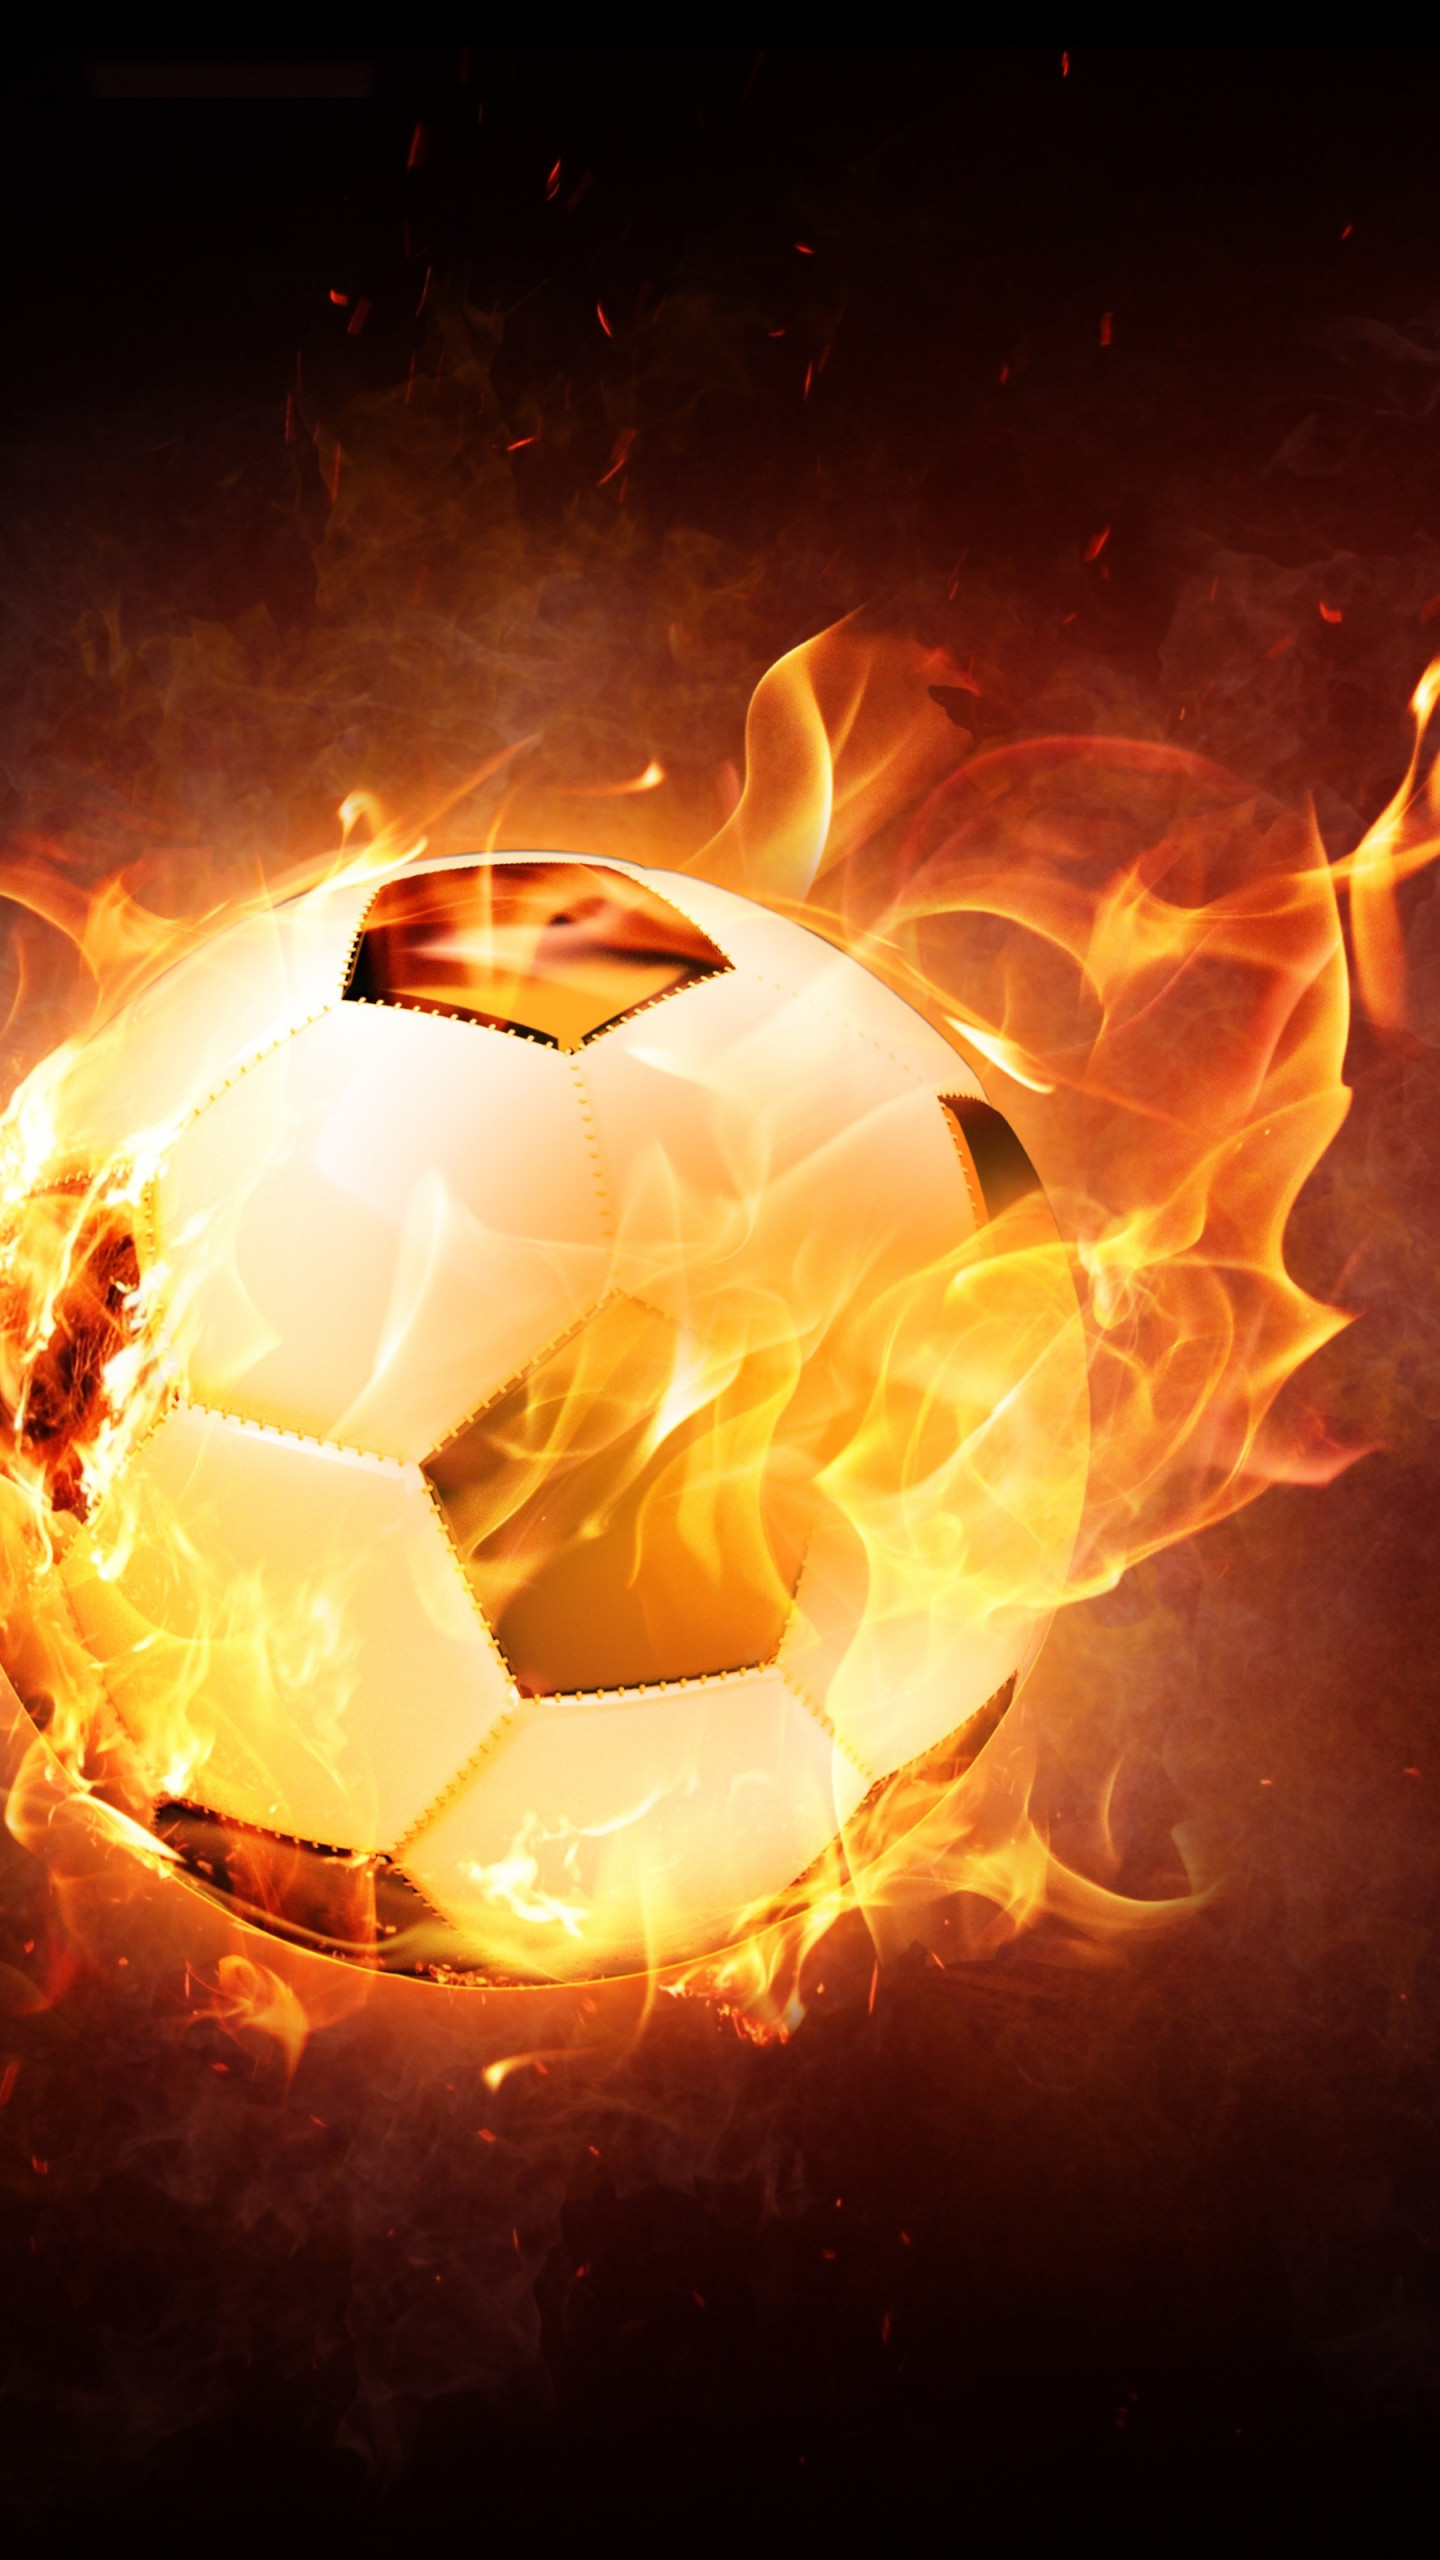 Download wallpaper: The football ball is on fire 1440x2560